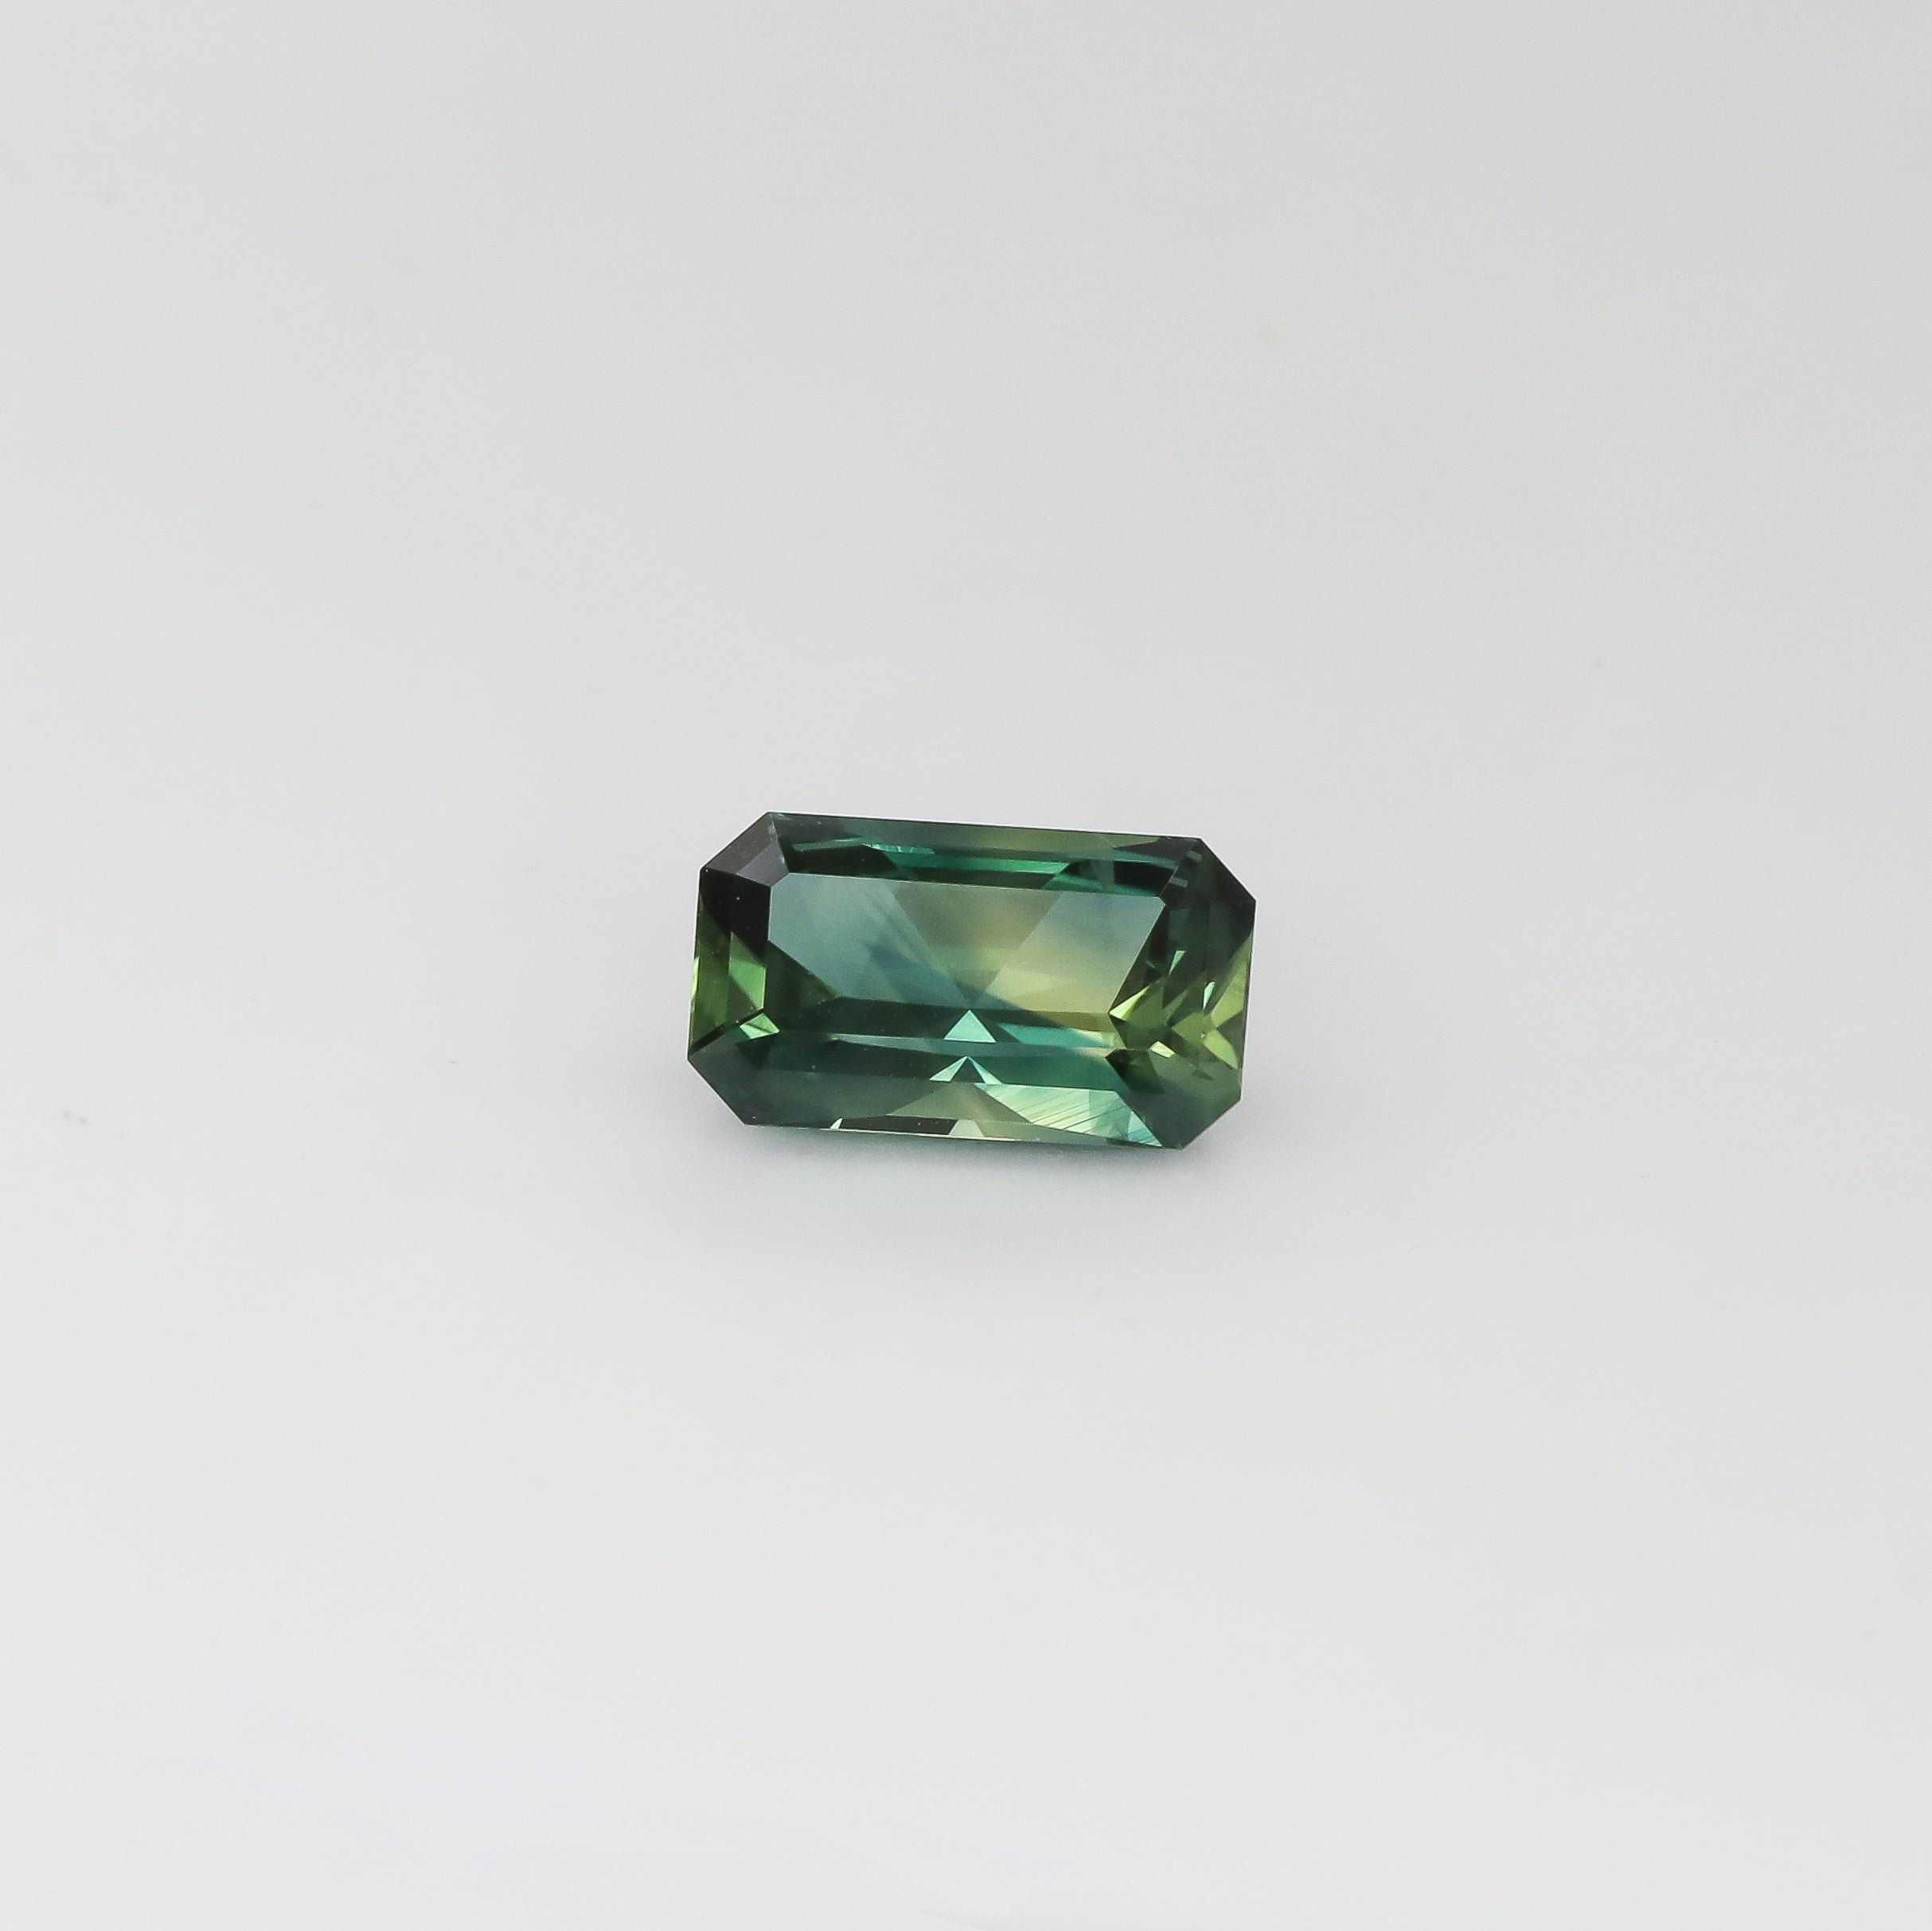 Teal Radiant Parti Sapphire 1.48ct